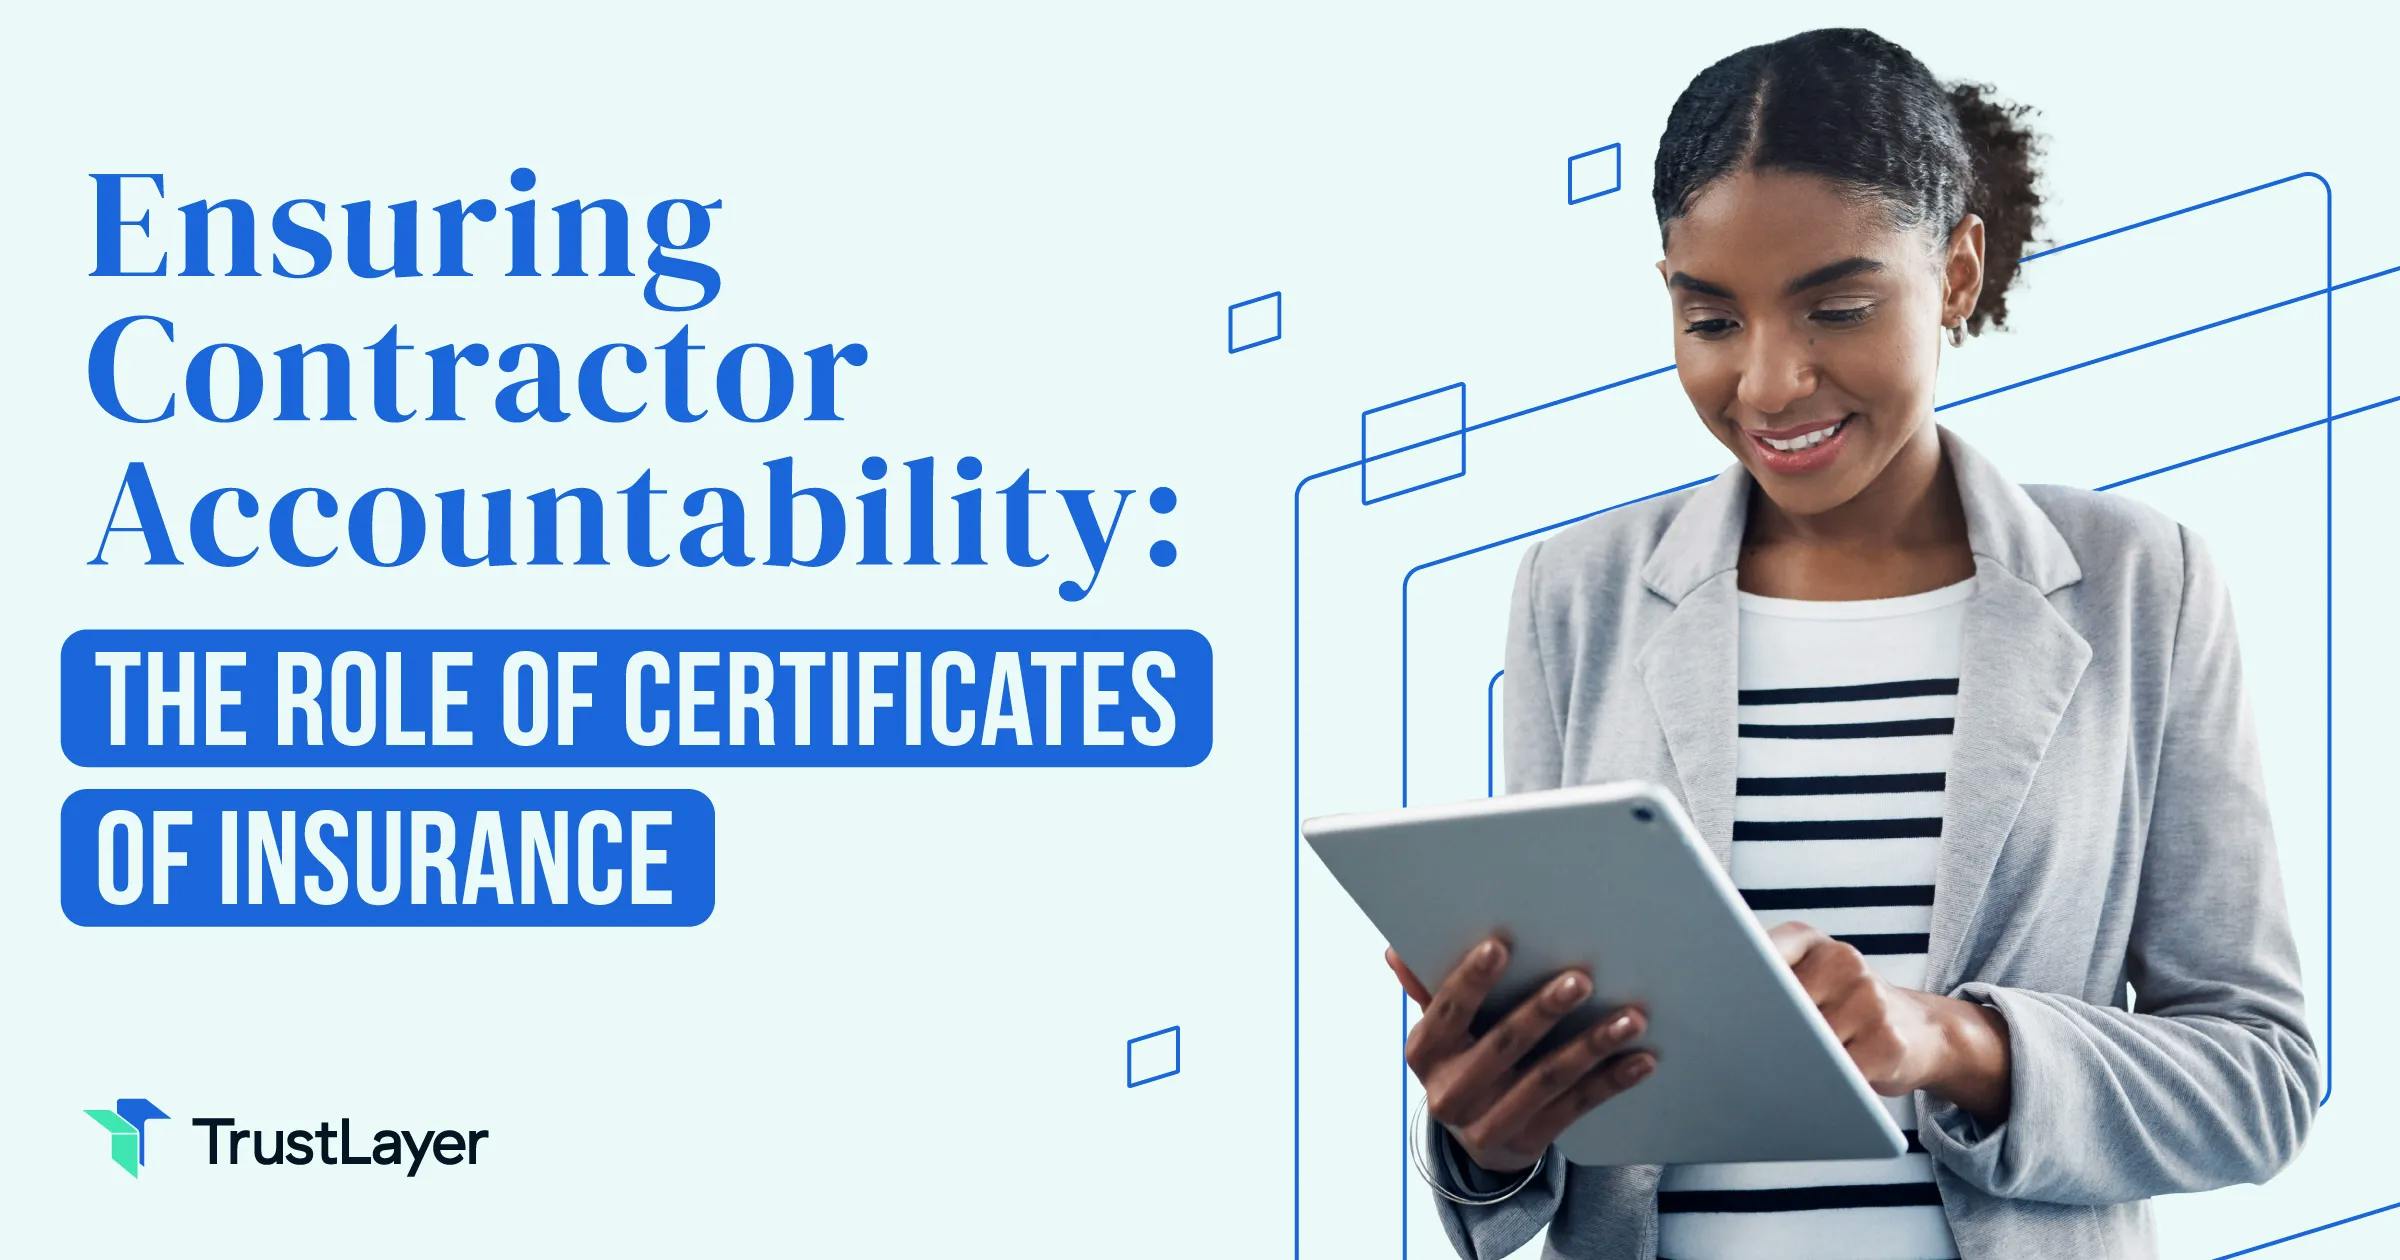 Ensuring Contractor Accountability: The Role of Certificates of Insurance